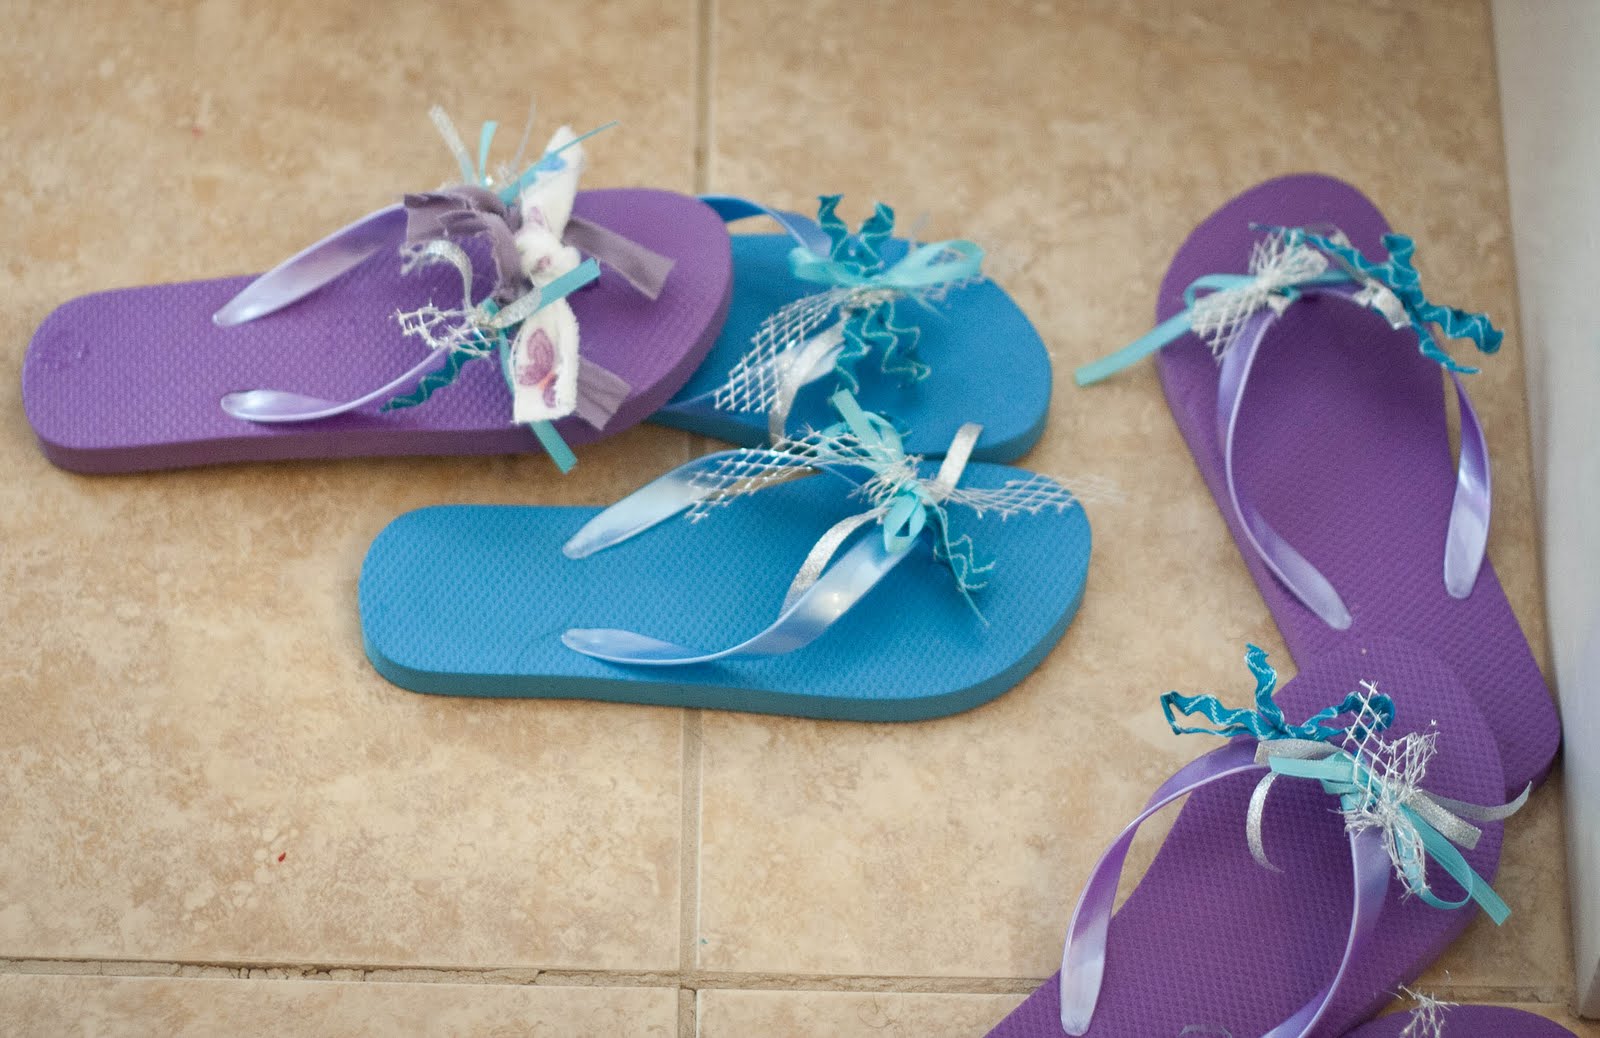 Spa Day Party - Fun with Flip Flops - My Insanity